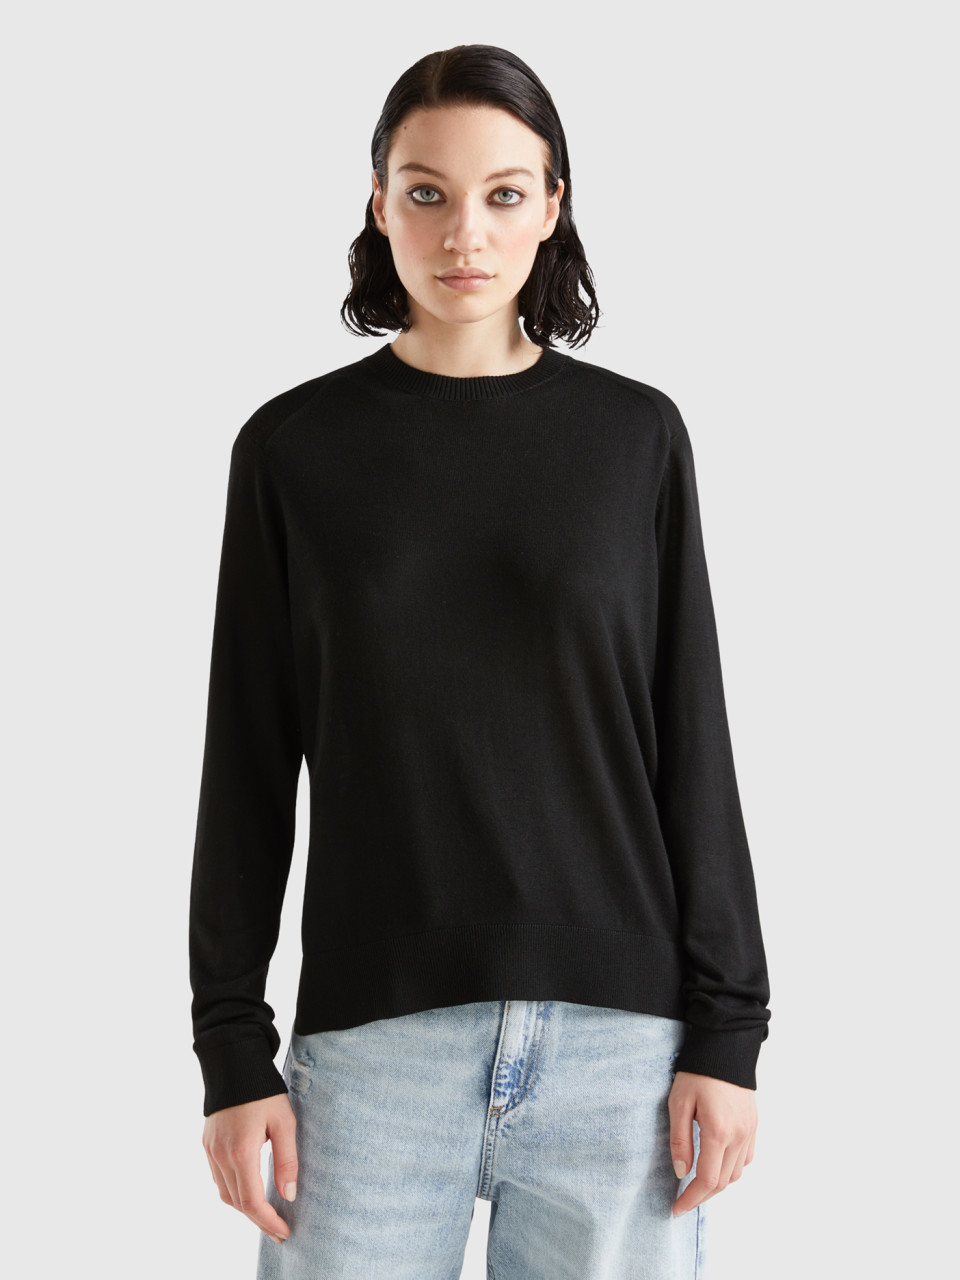 Benetton, Sweater In Viscose Blend With Slits, Black, Women